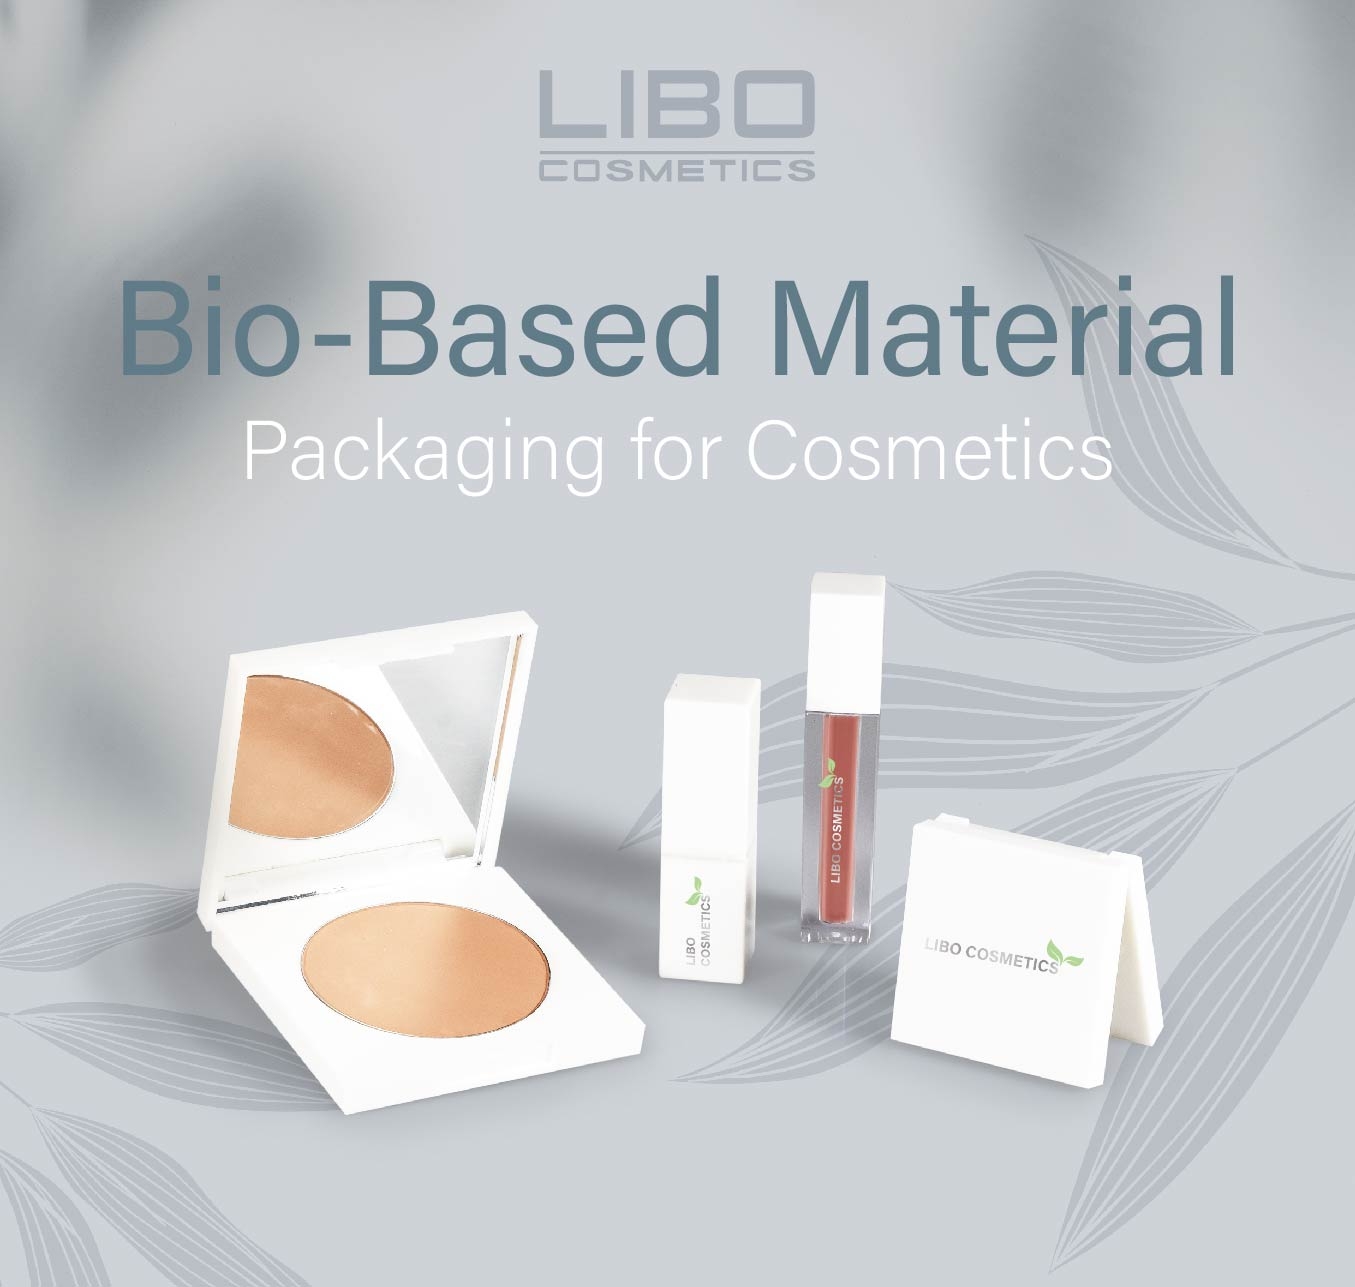 Sustainable Bio-Based Material Packaging for Cosmetics!